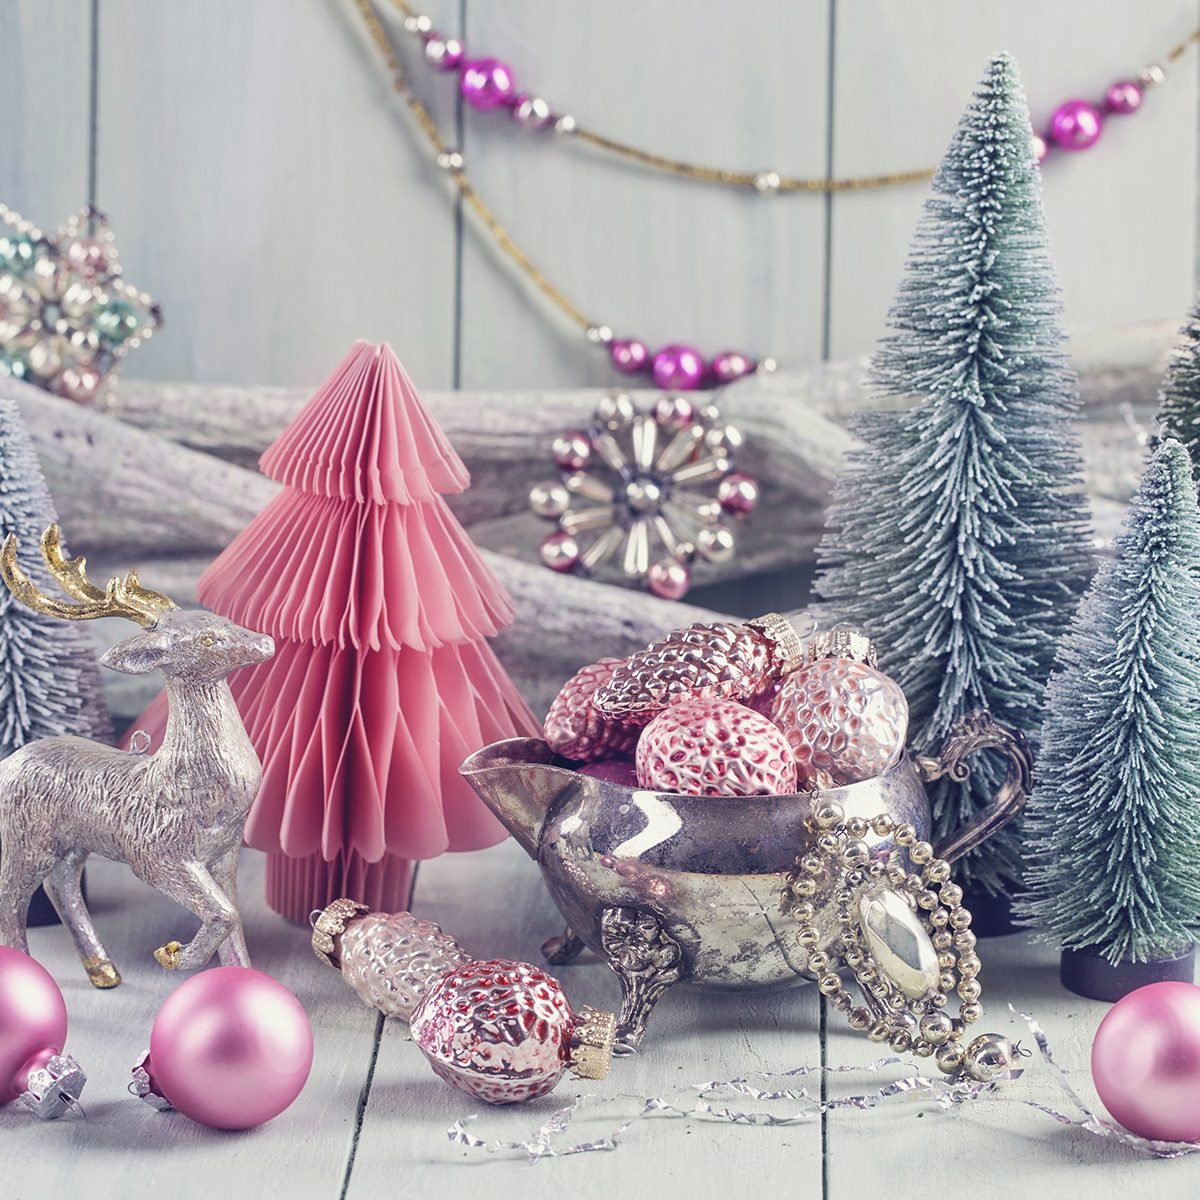 Hosting A Christmas Baby Shower Here Are 10 Holiday Themed Ideas